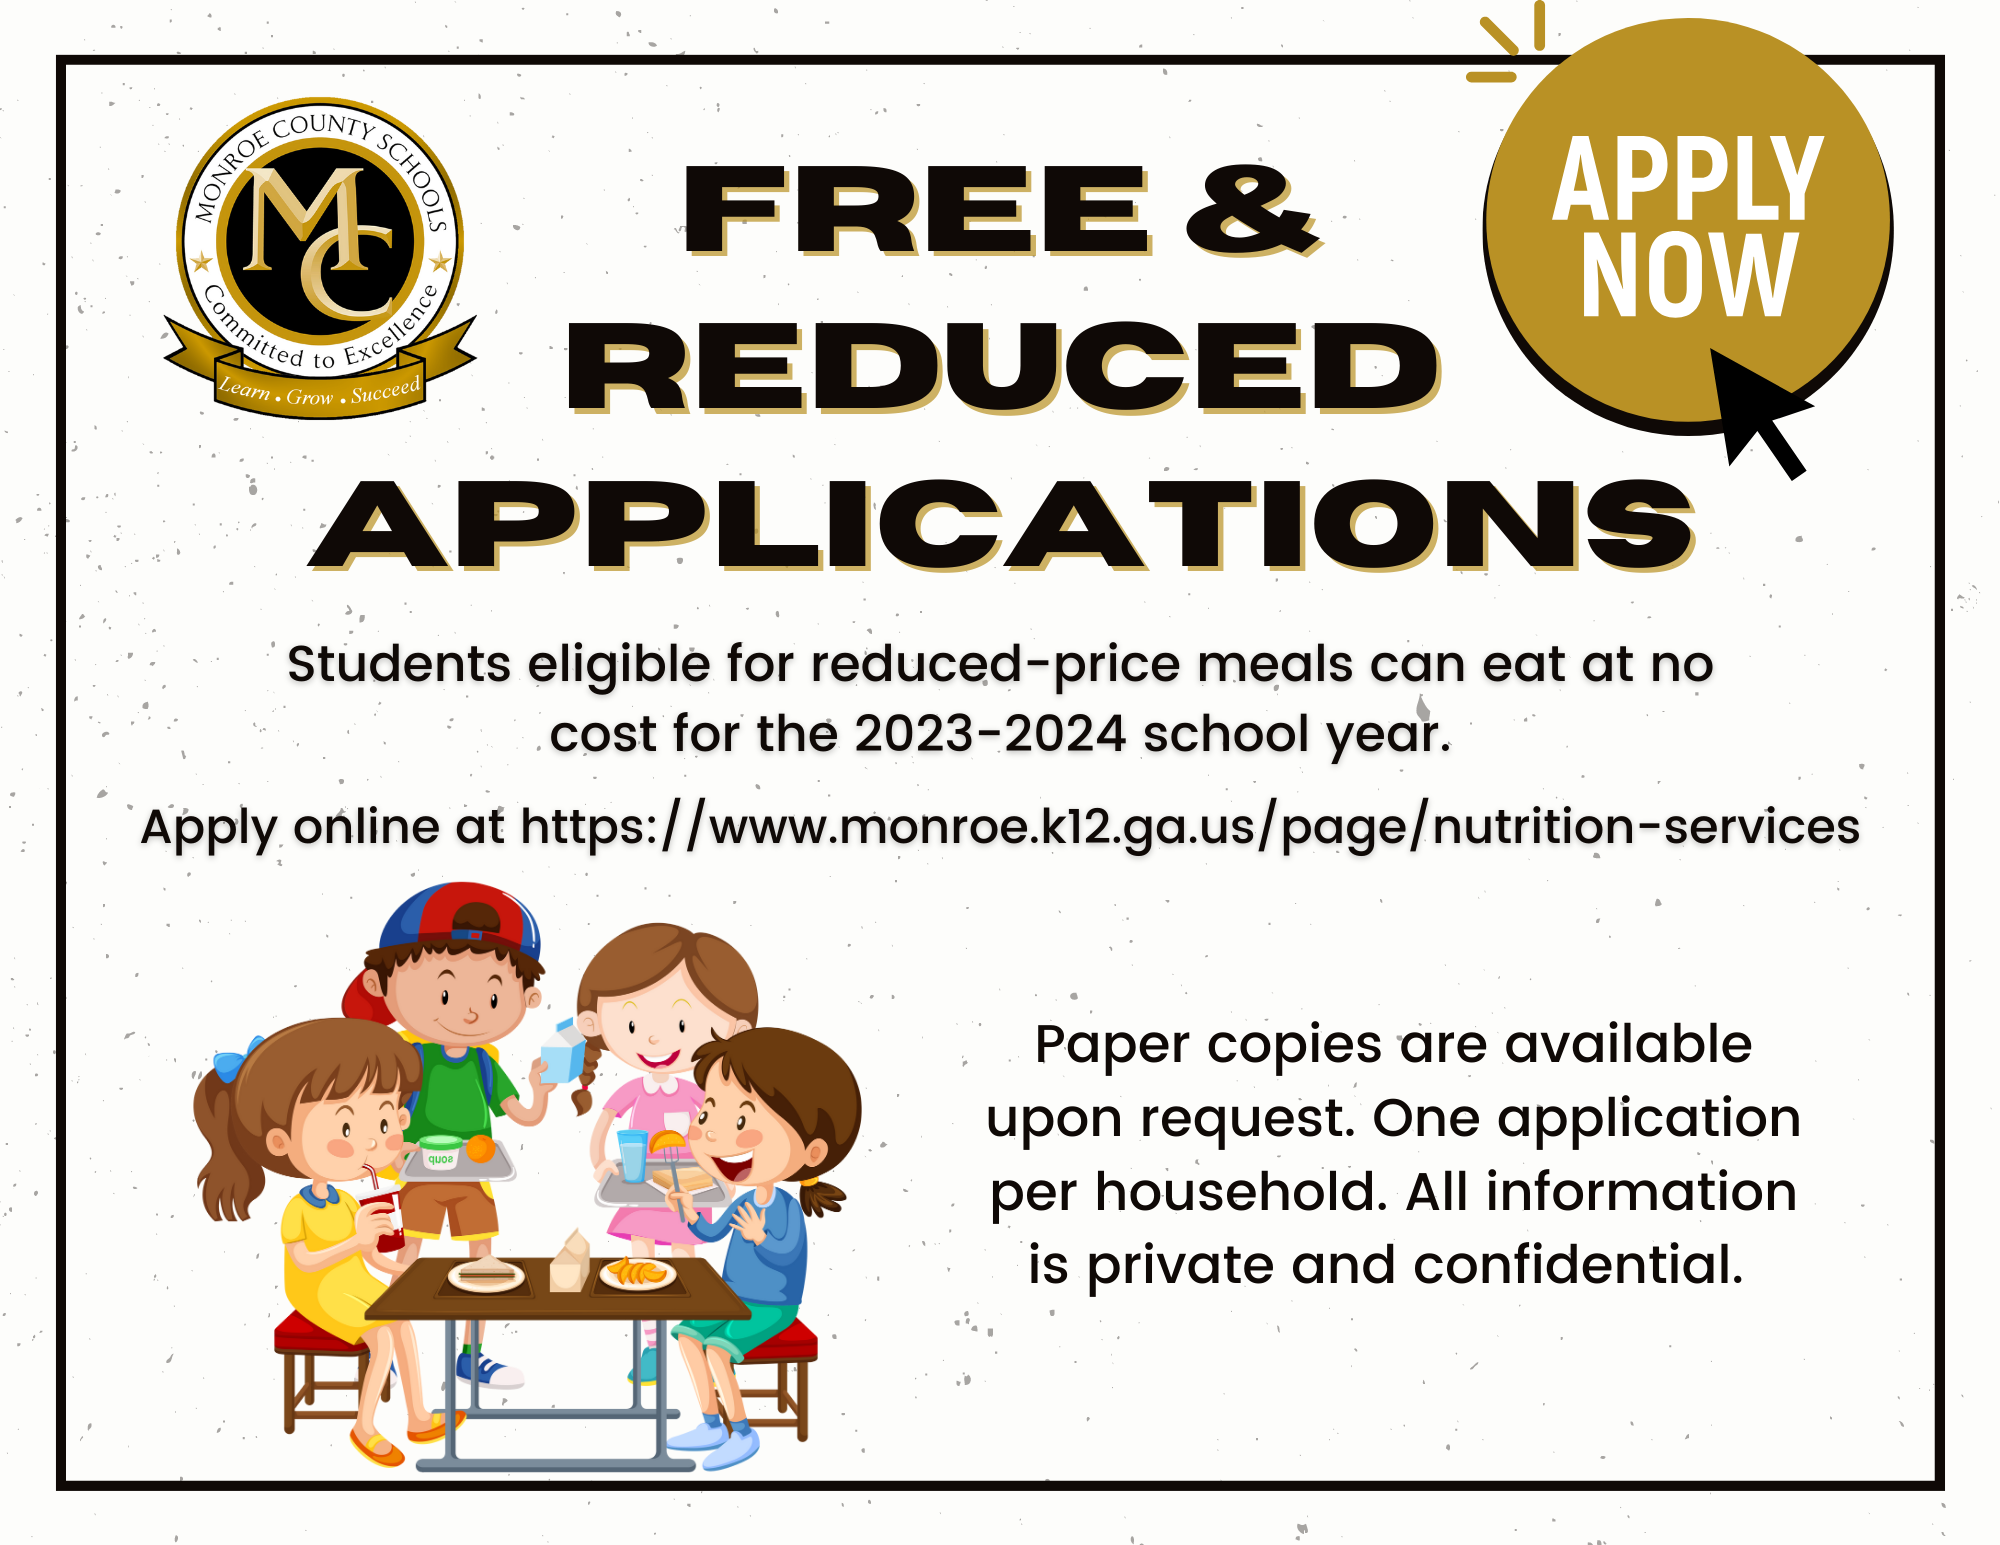 Students eligible for reduced-price meals can eat at no cost for the 2023-2024 school year.